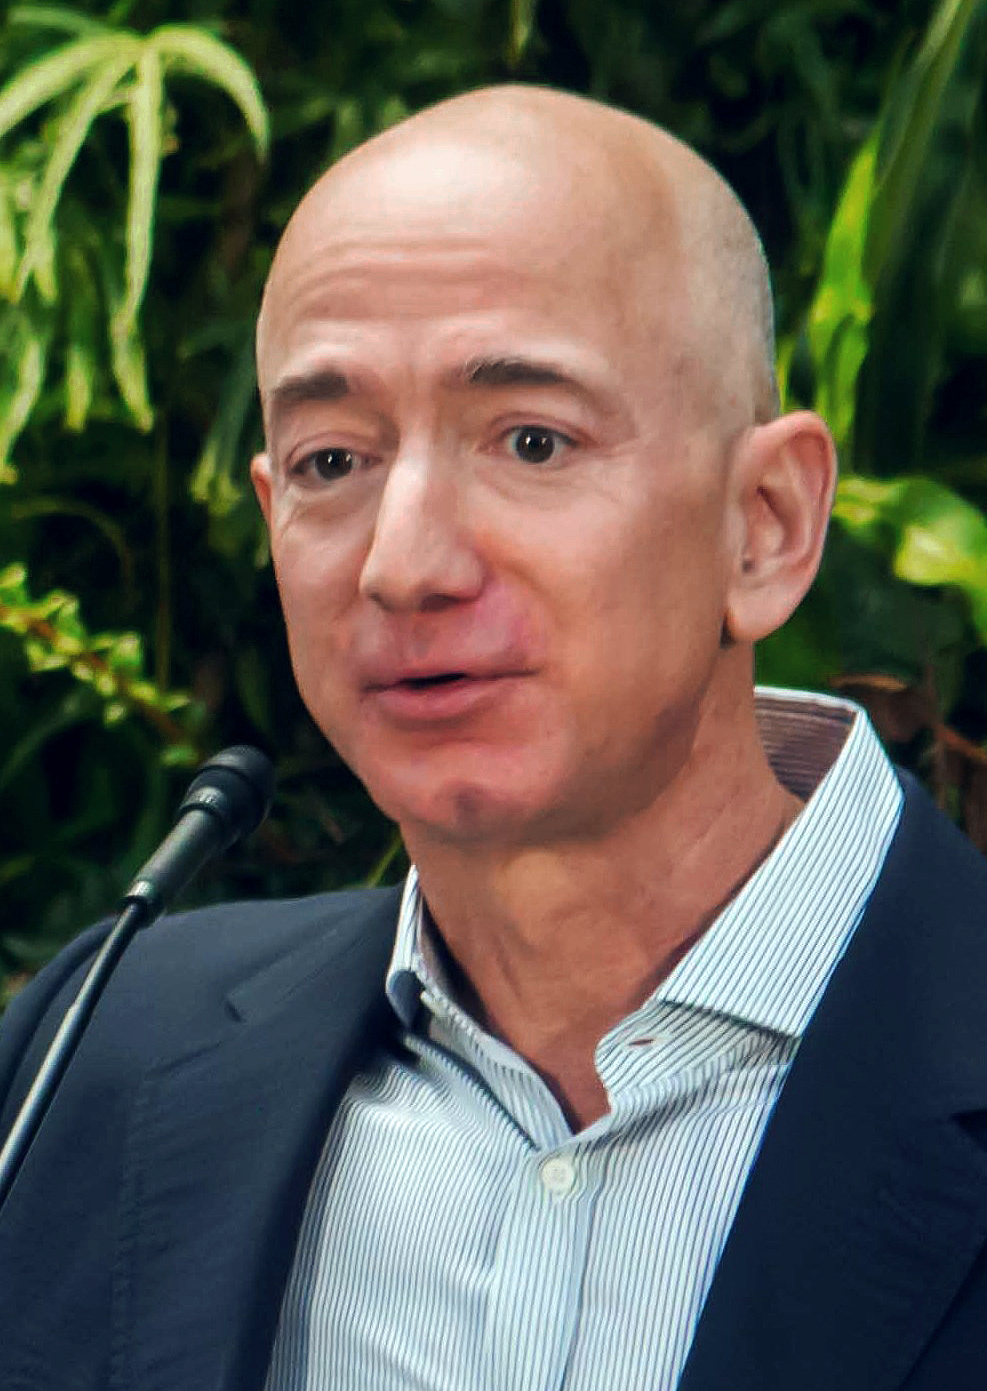 Drawing a Course: Recommendations for Jeff Bezos' Potential Yacht Ownership